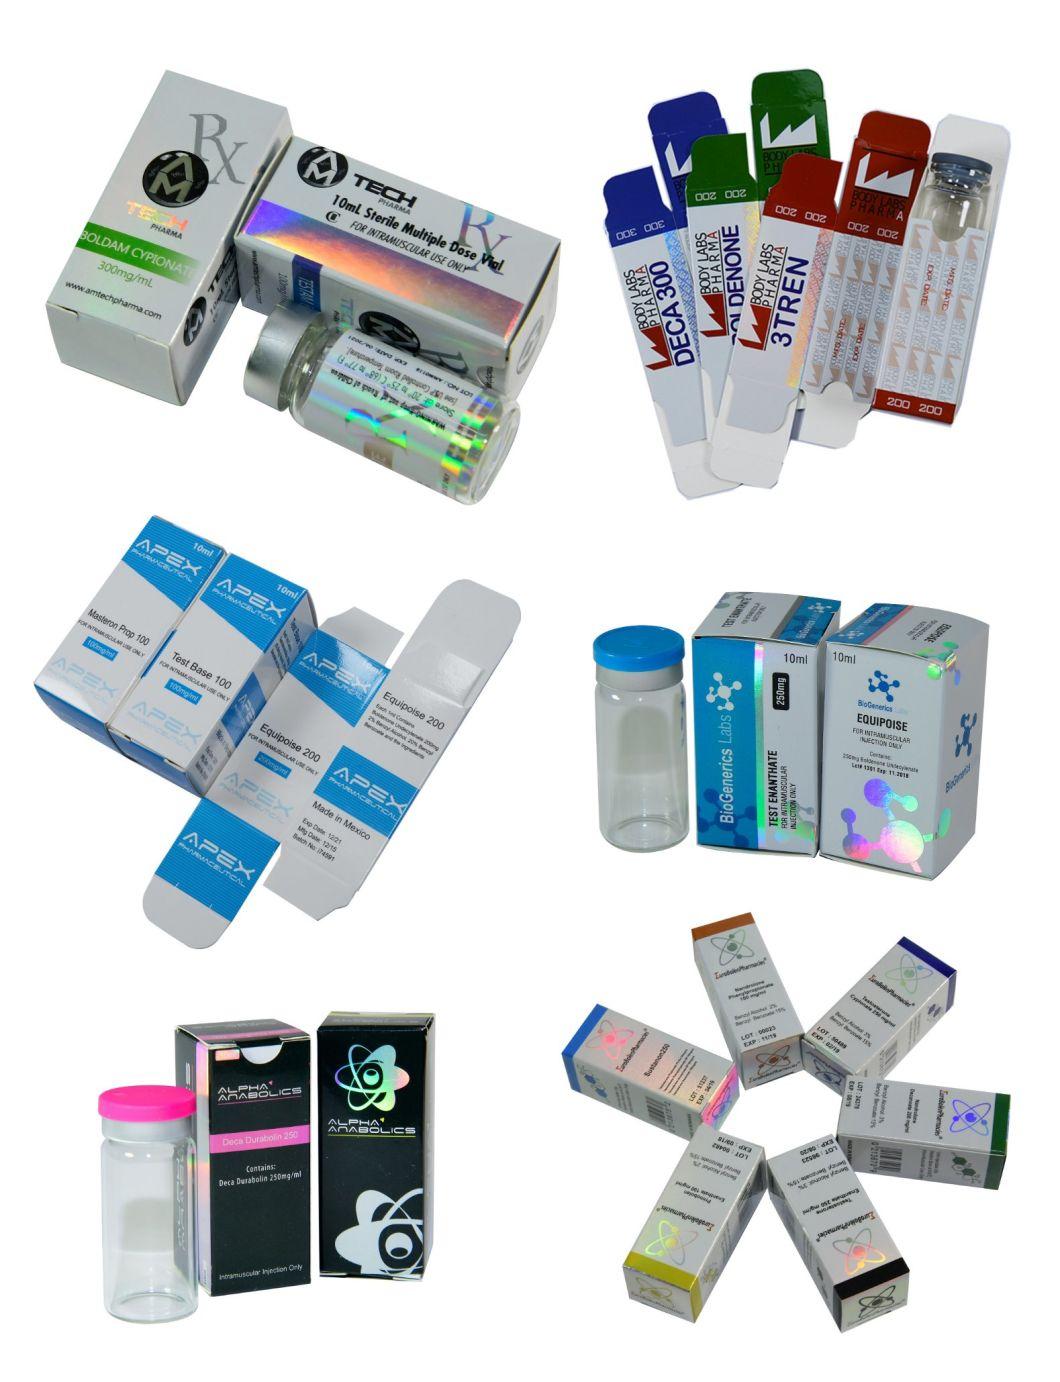 Vial 10ml 20ml OEM Medical Label Vial 5ml 10ml 20ml Steroides Vial Labels and Boxes